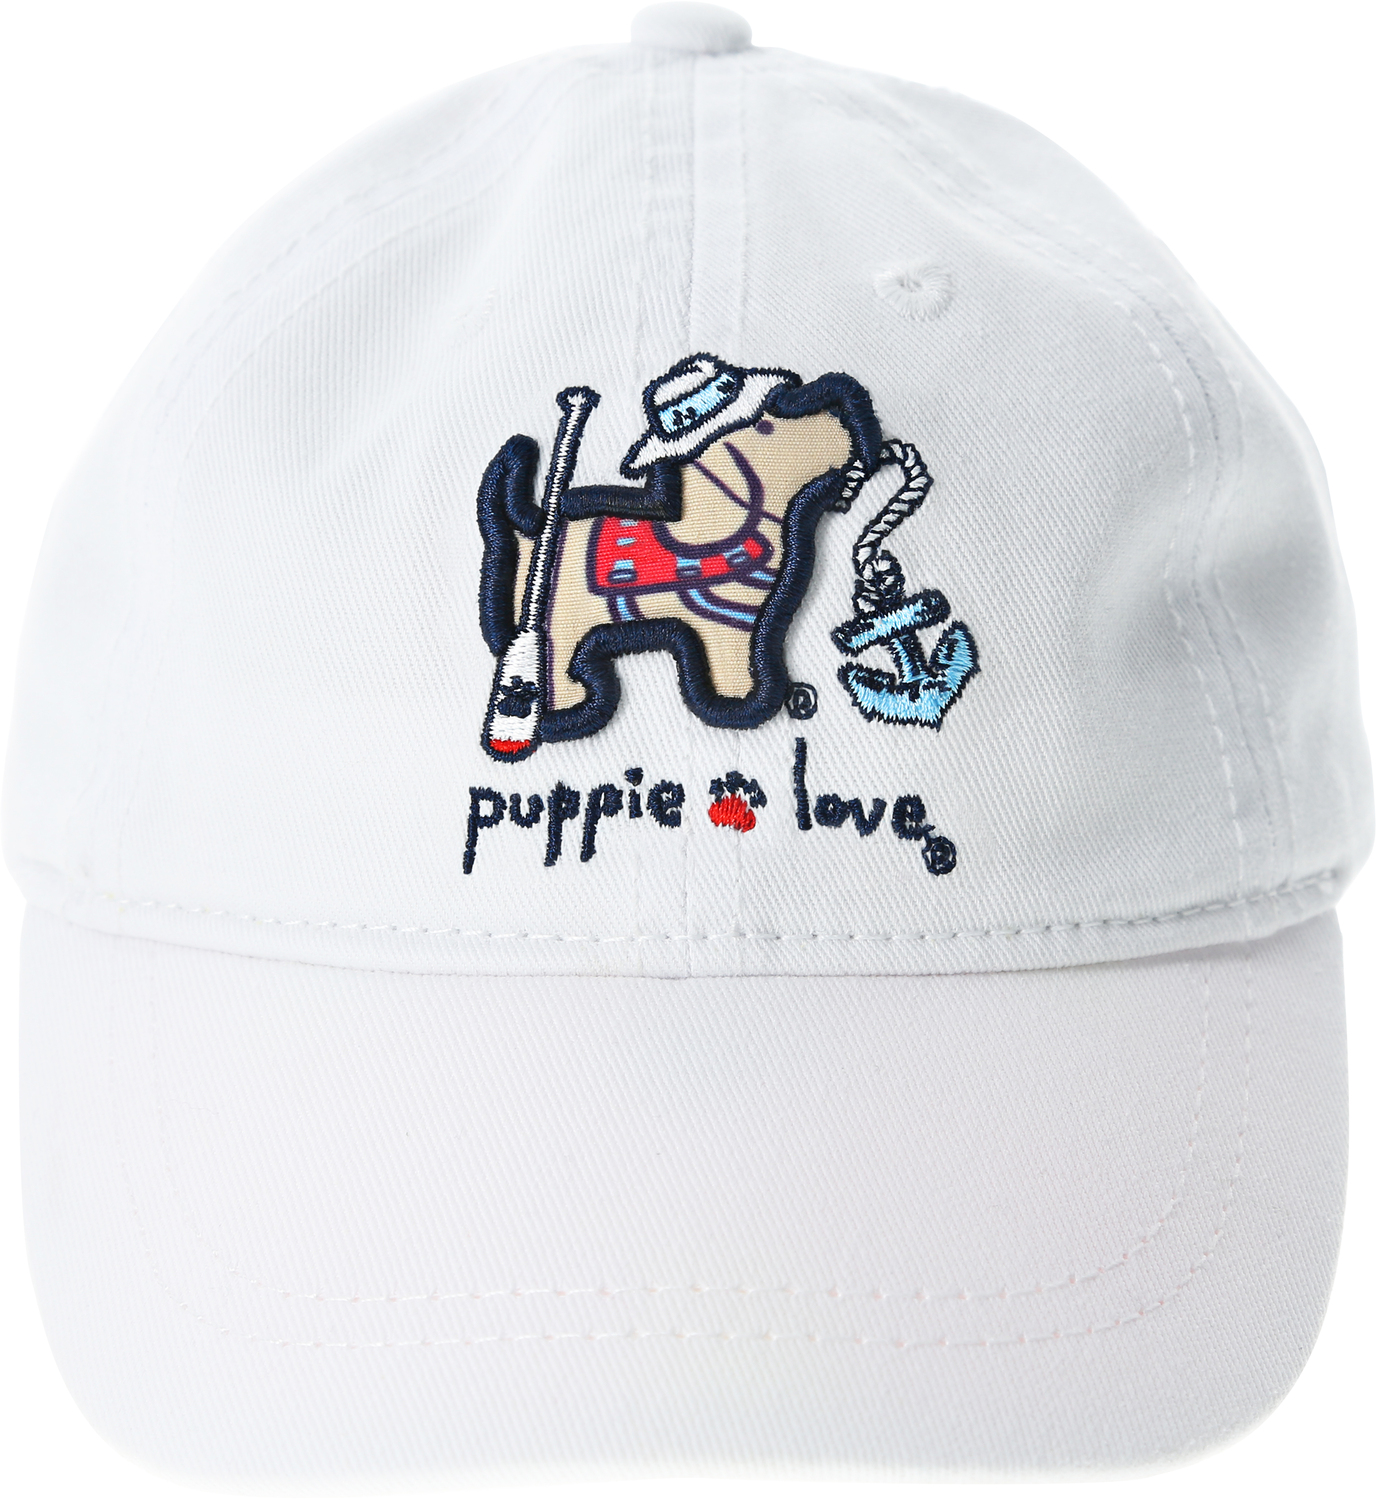 Lake by Puppie Love - Lake - 18" to 19" Adjustable Baby Hat
(0-12 Months)